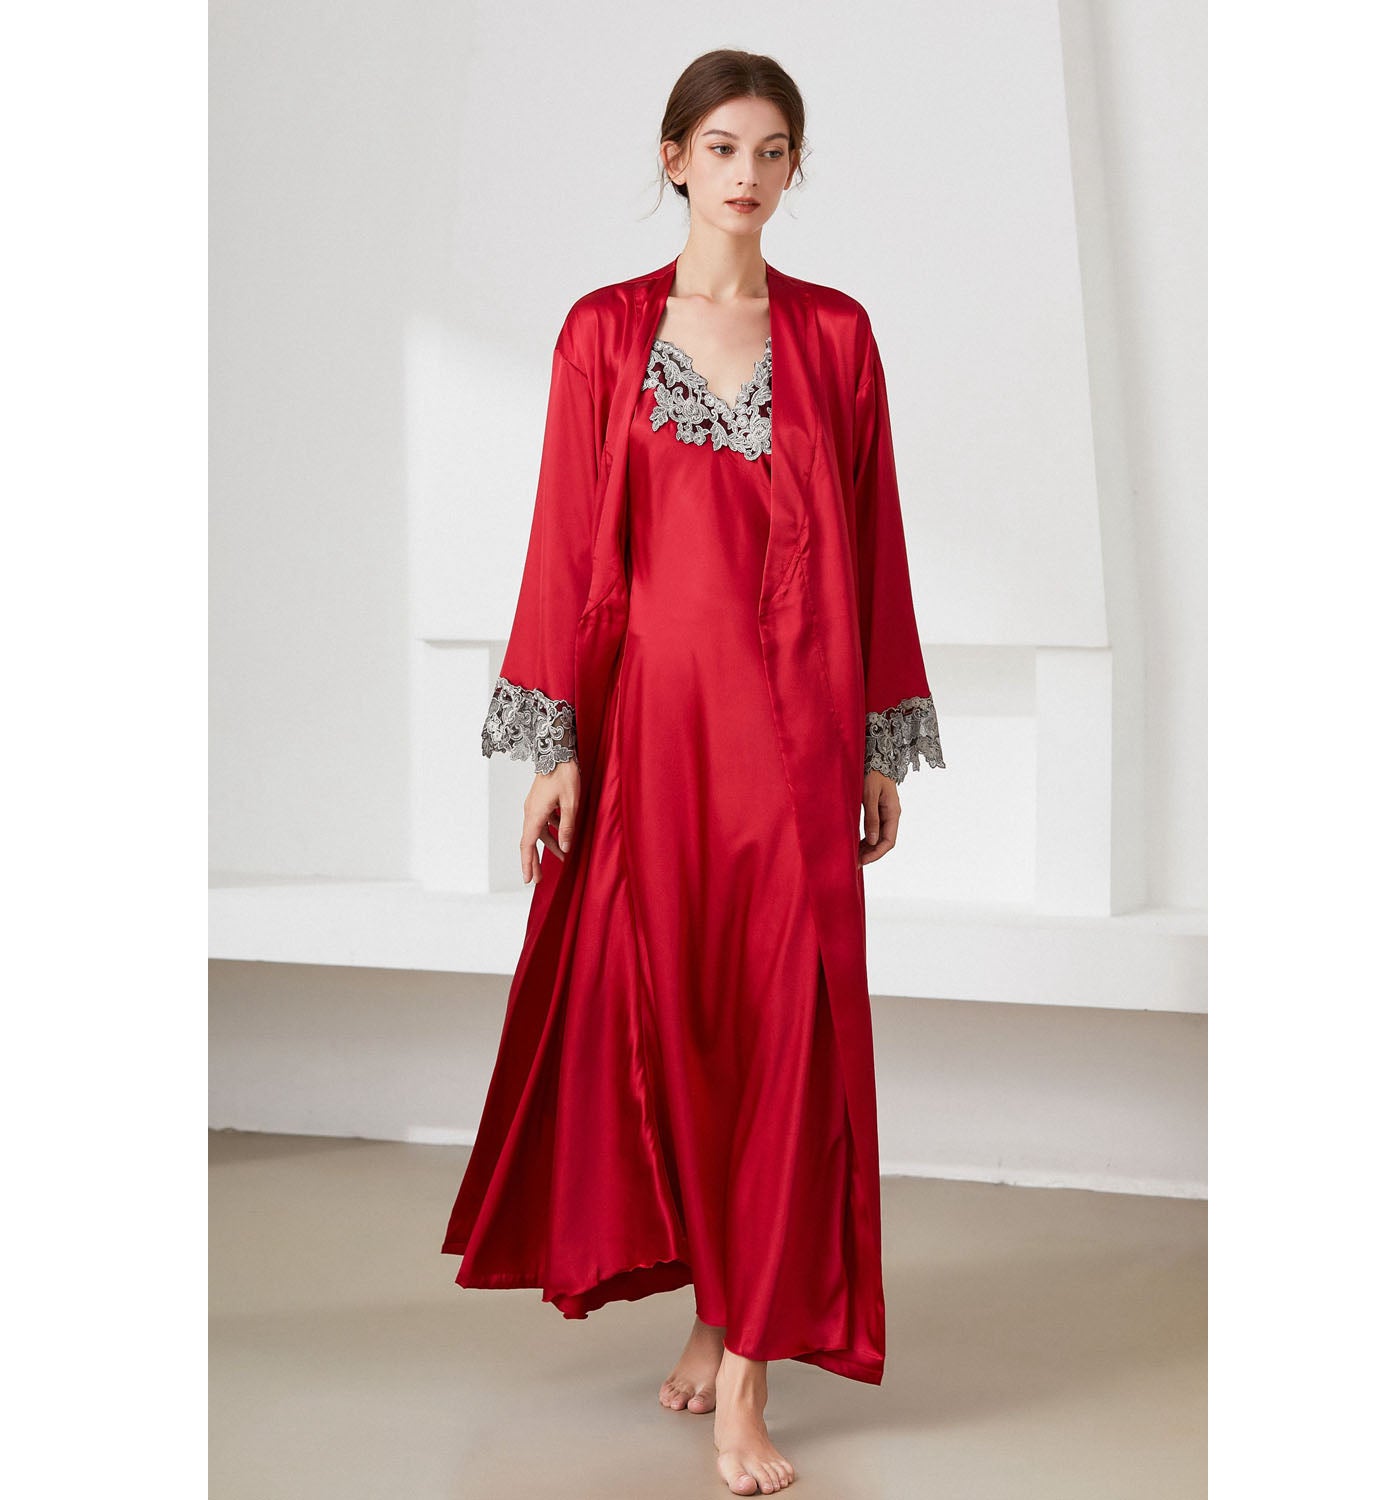 Model wearing red nightgown and robe set with lace trim